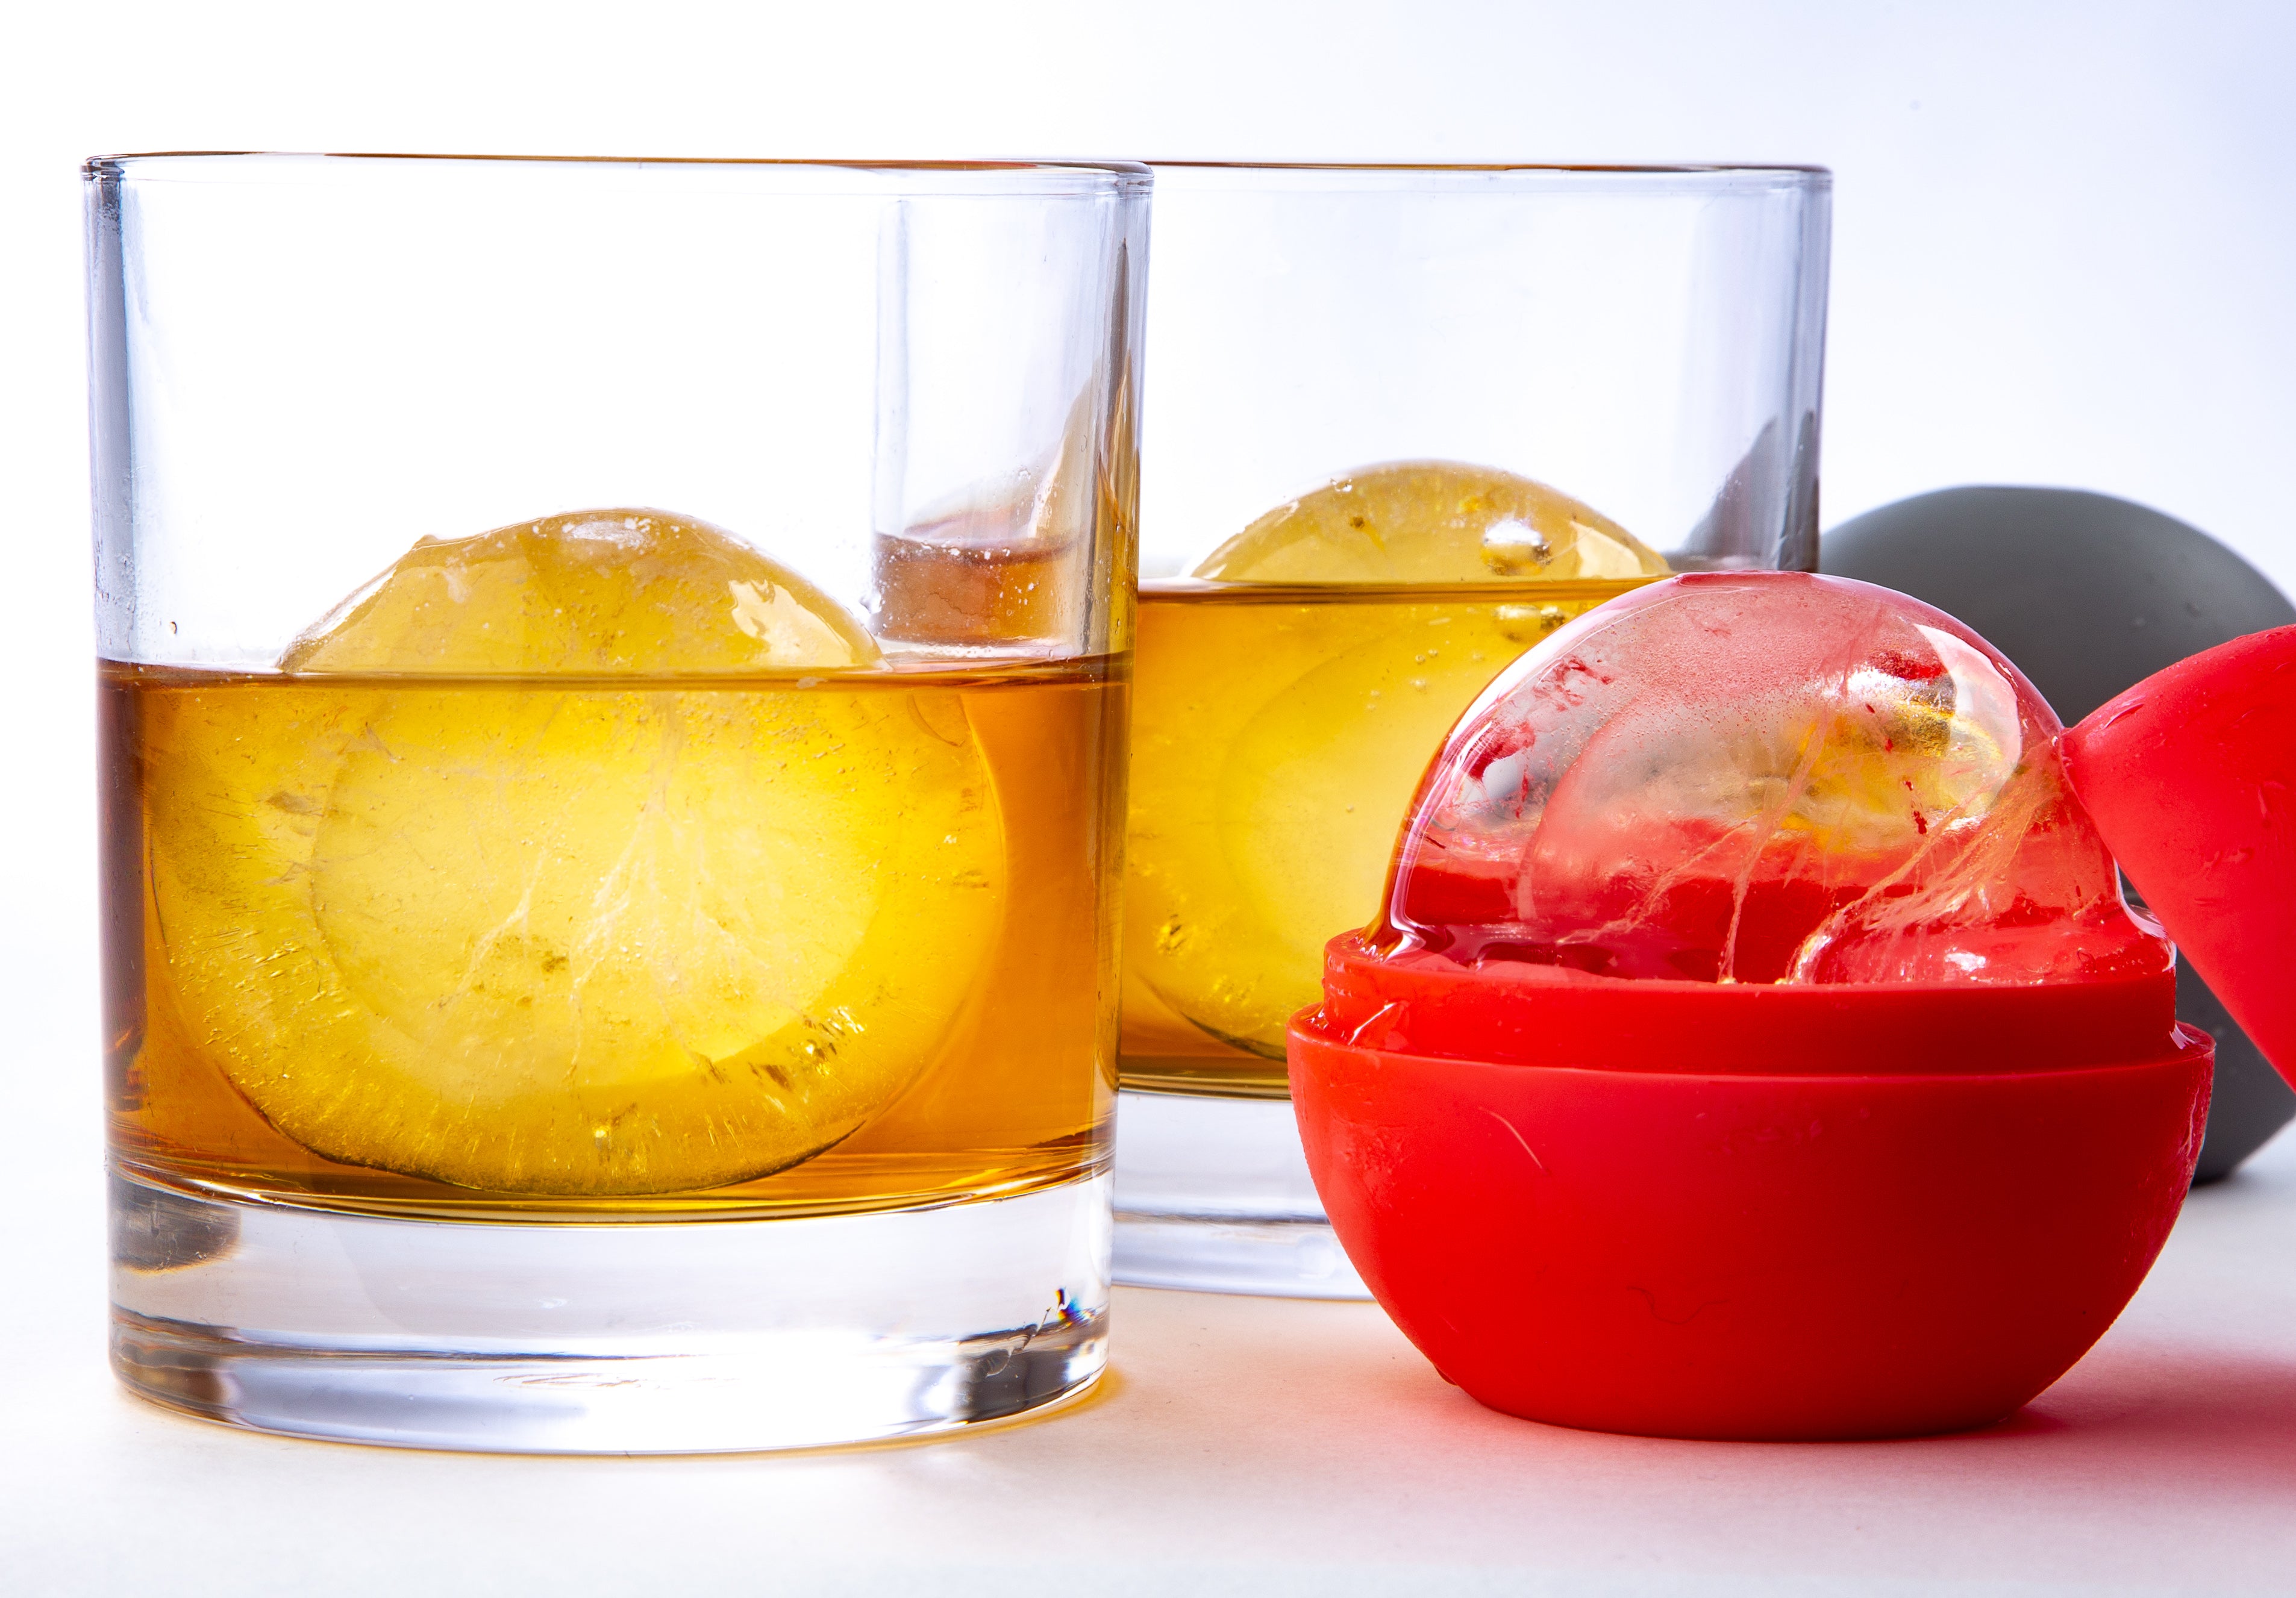 Giveaway Silicon Ice Ball Molds, Drinkware & Barware